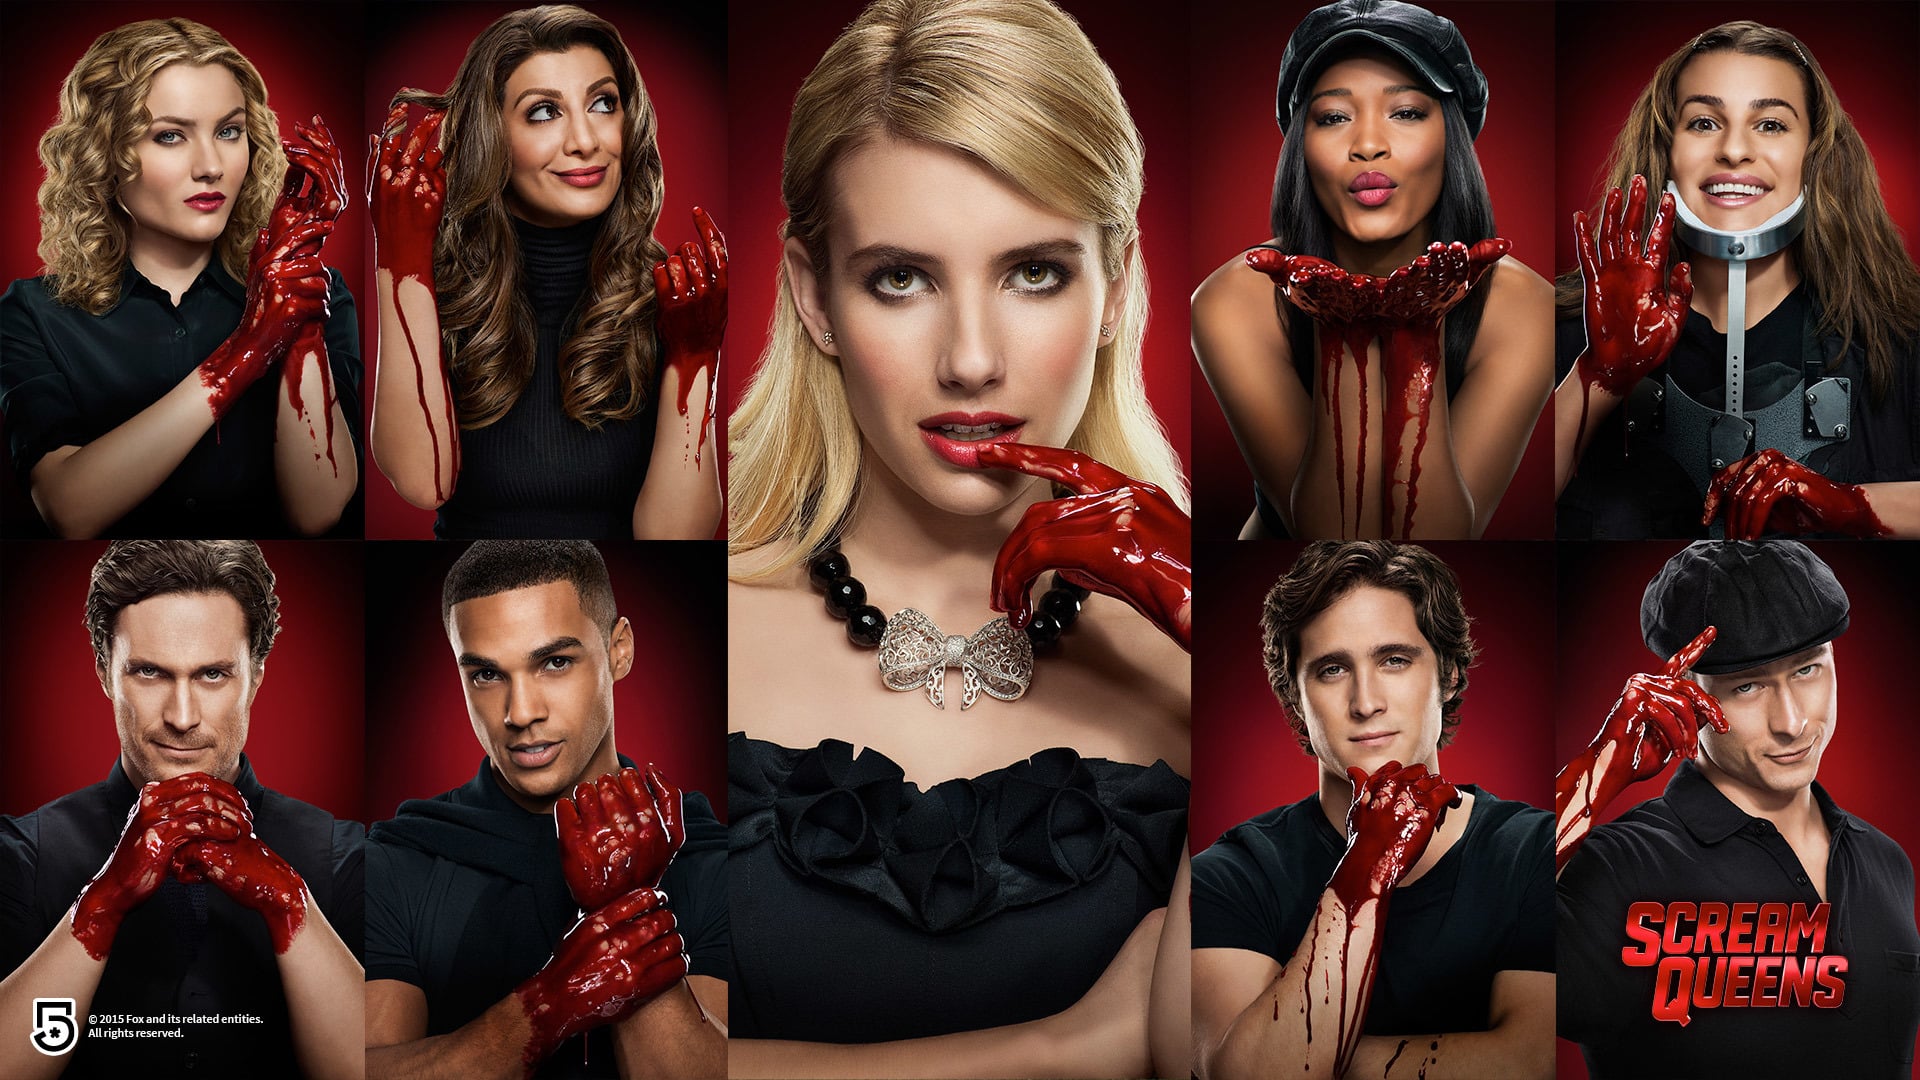 This theory predicts an American Horror Story and Scream Queens crossover